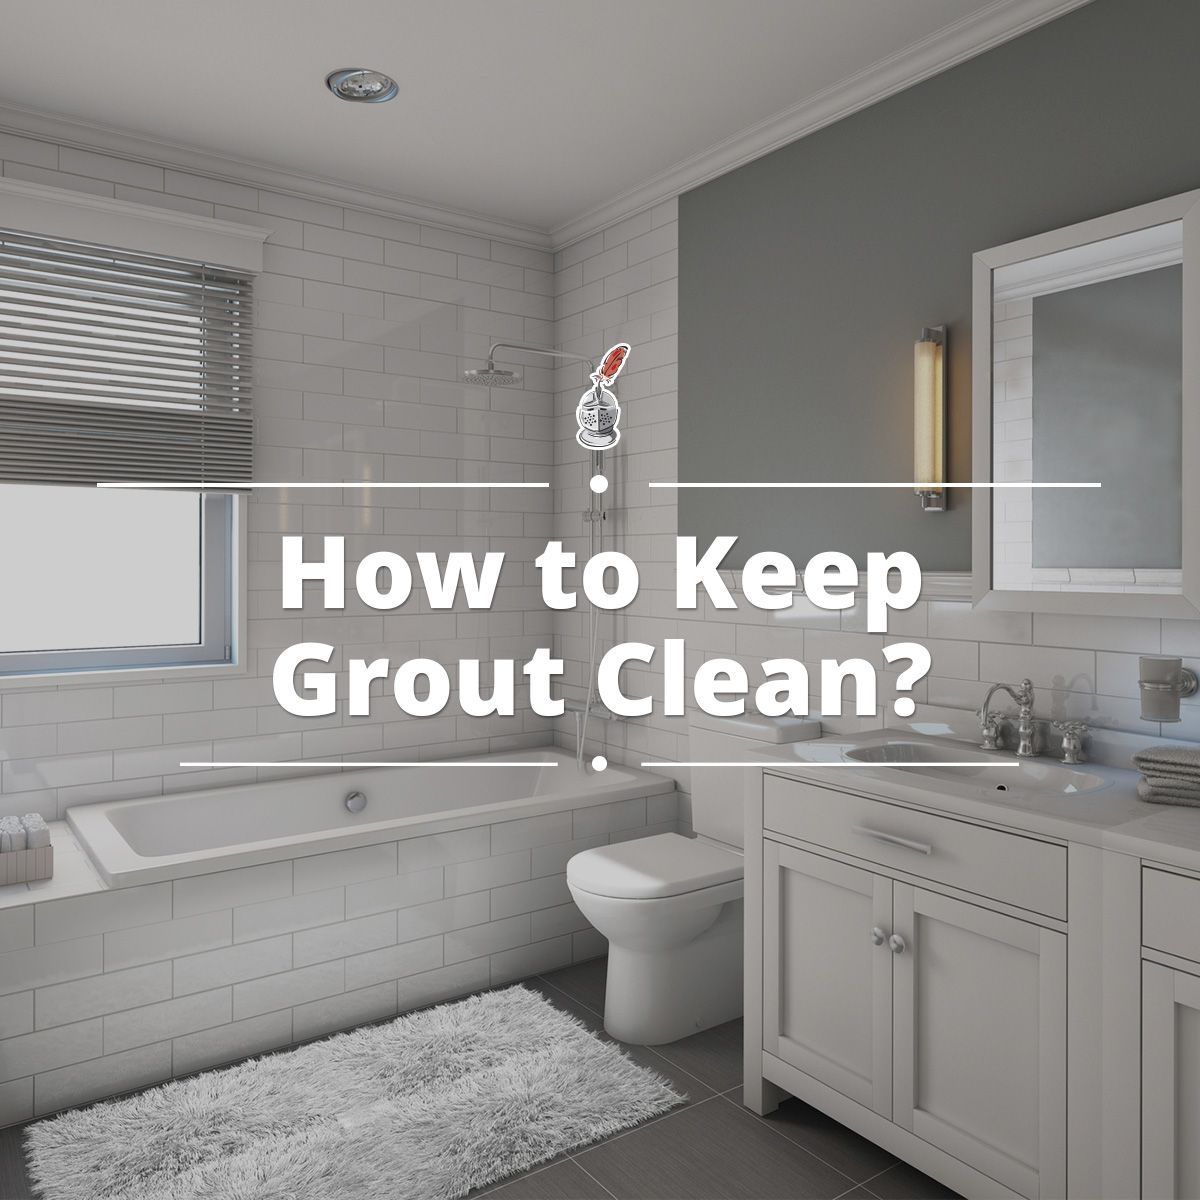 How to Keep Grout Clean?